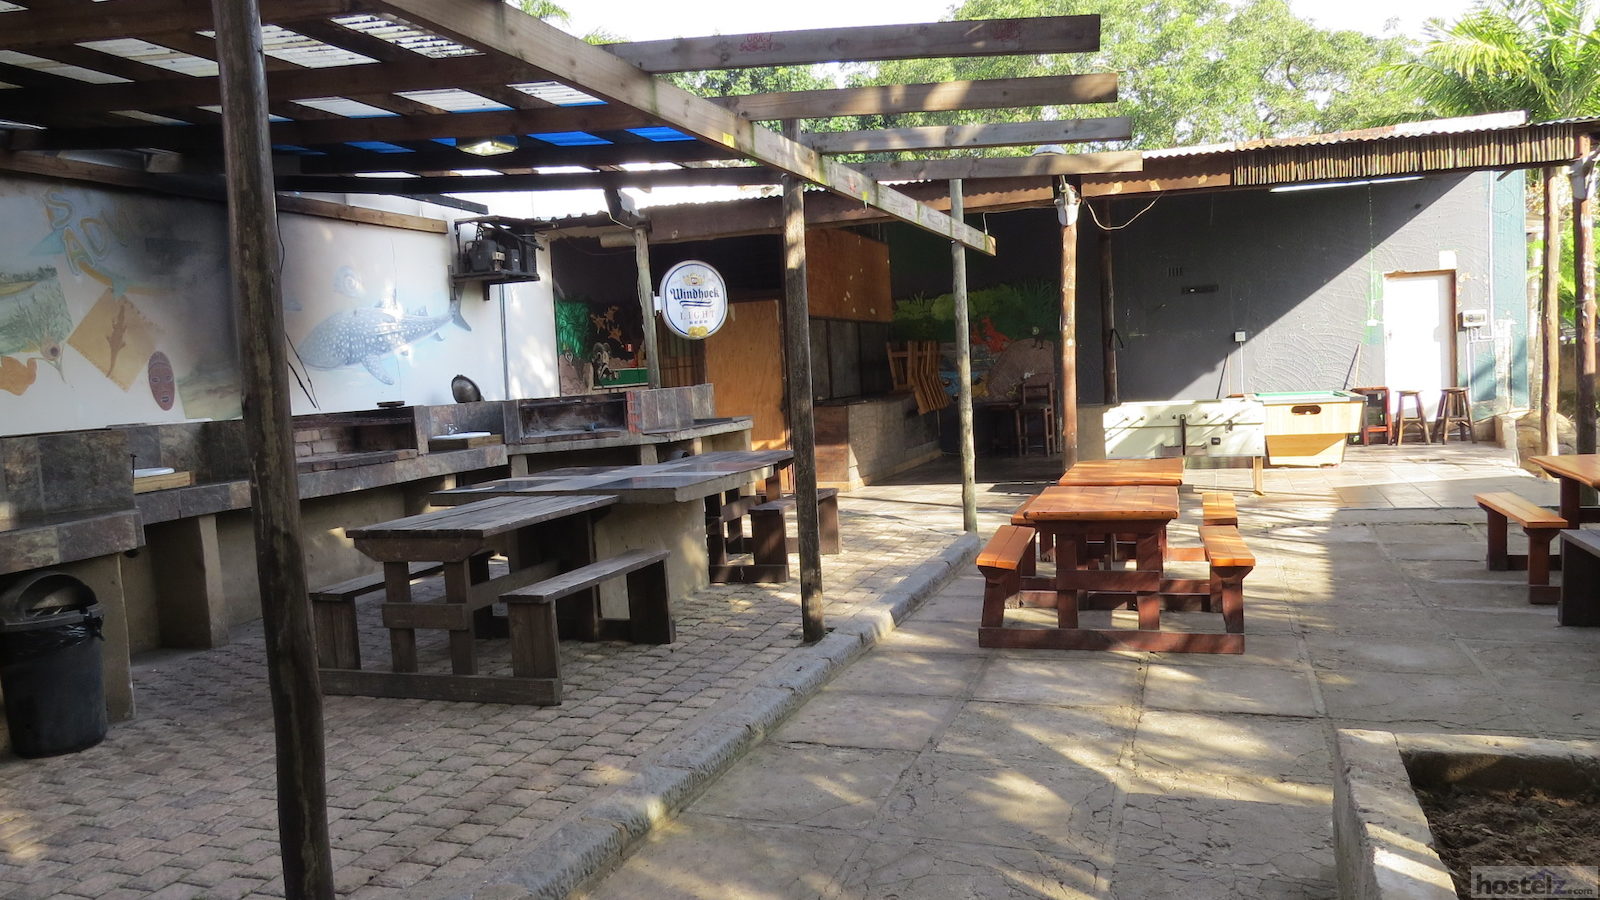 Games and Barbecue Area